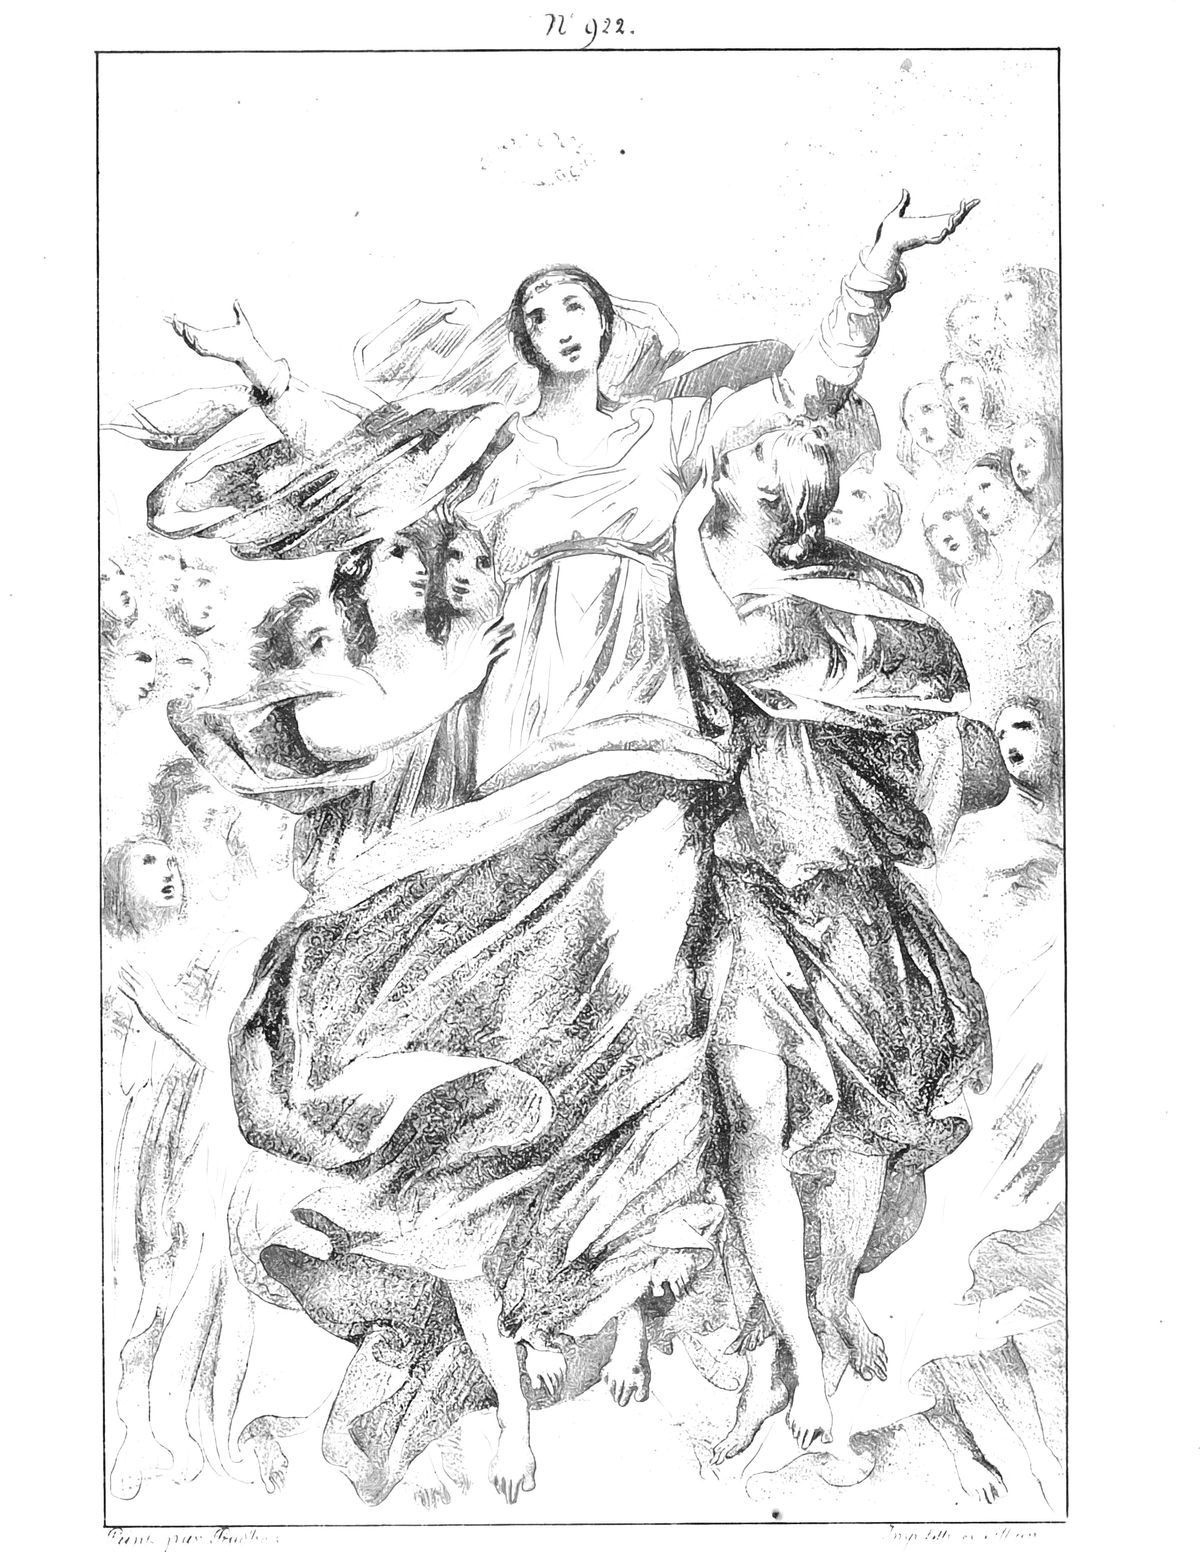 Assumption of Mary (1818-1852) by François Jean Villain - Catholic Coloring Page